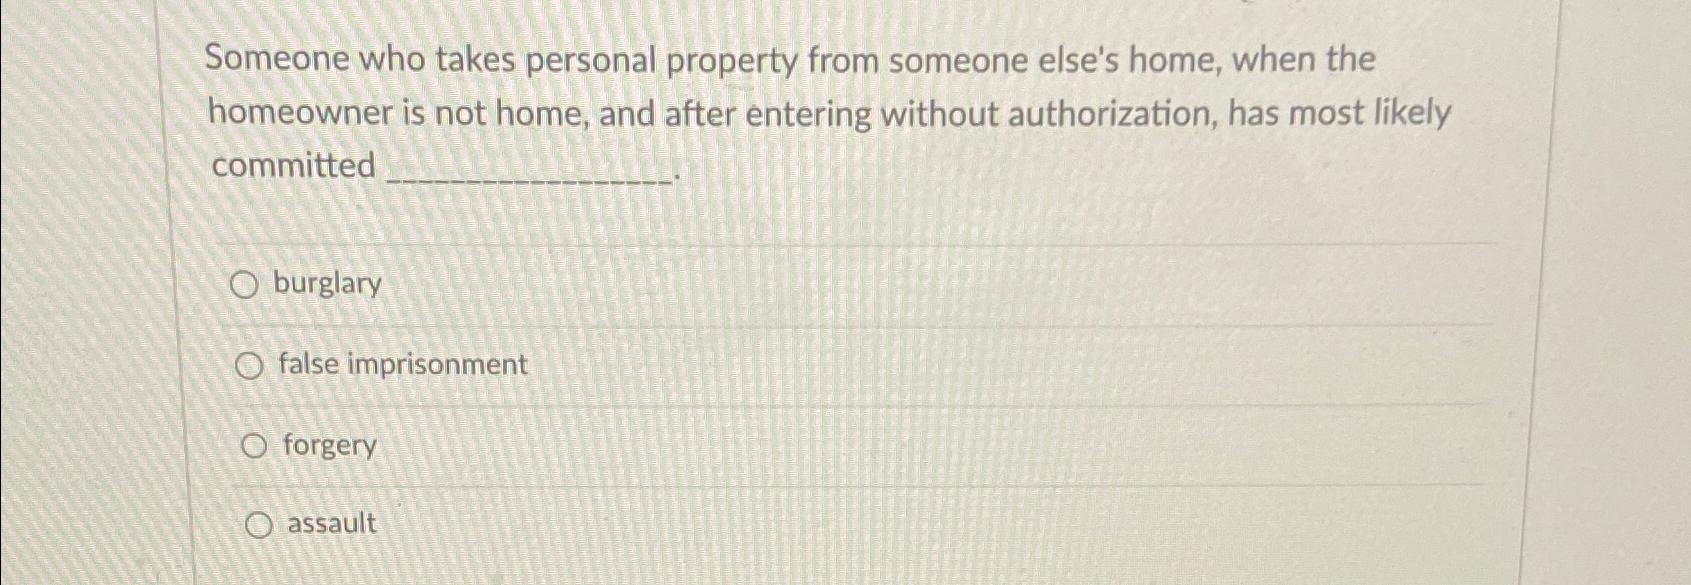 Someone who takes personal property from someone else's home, when the homeowner is not home, and after